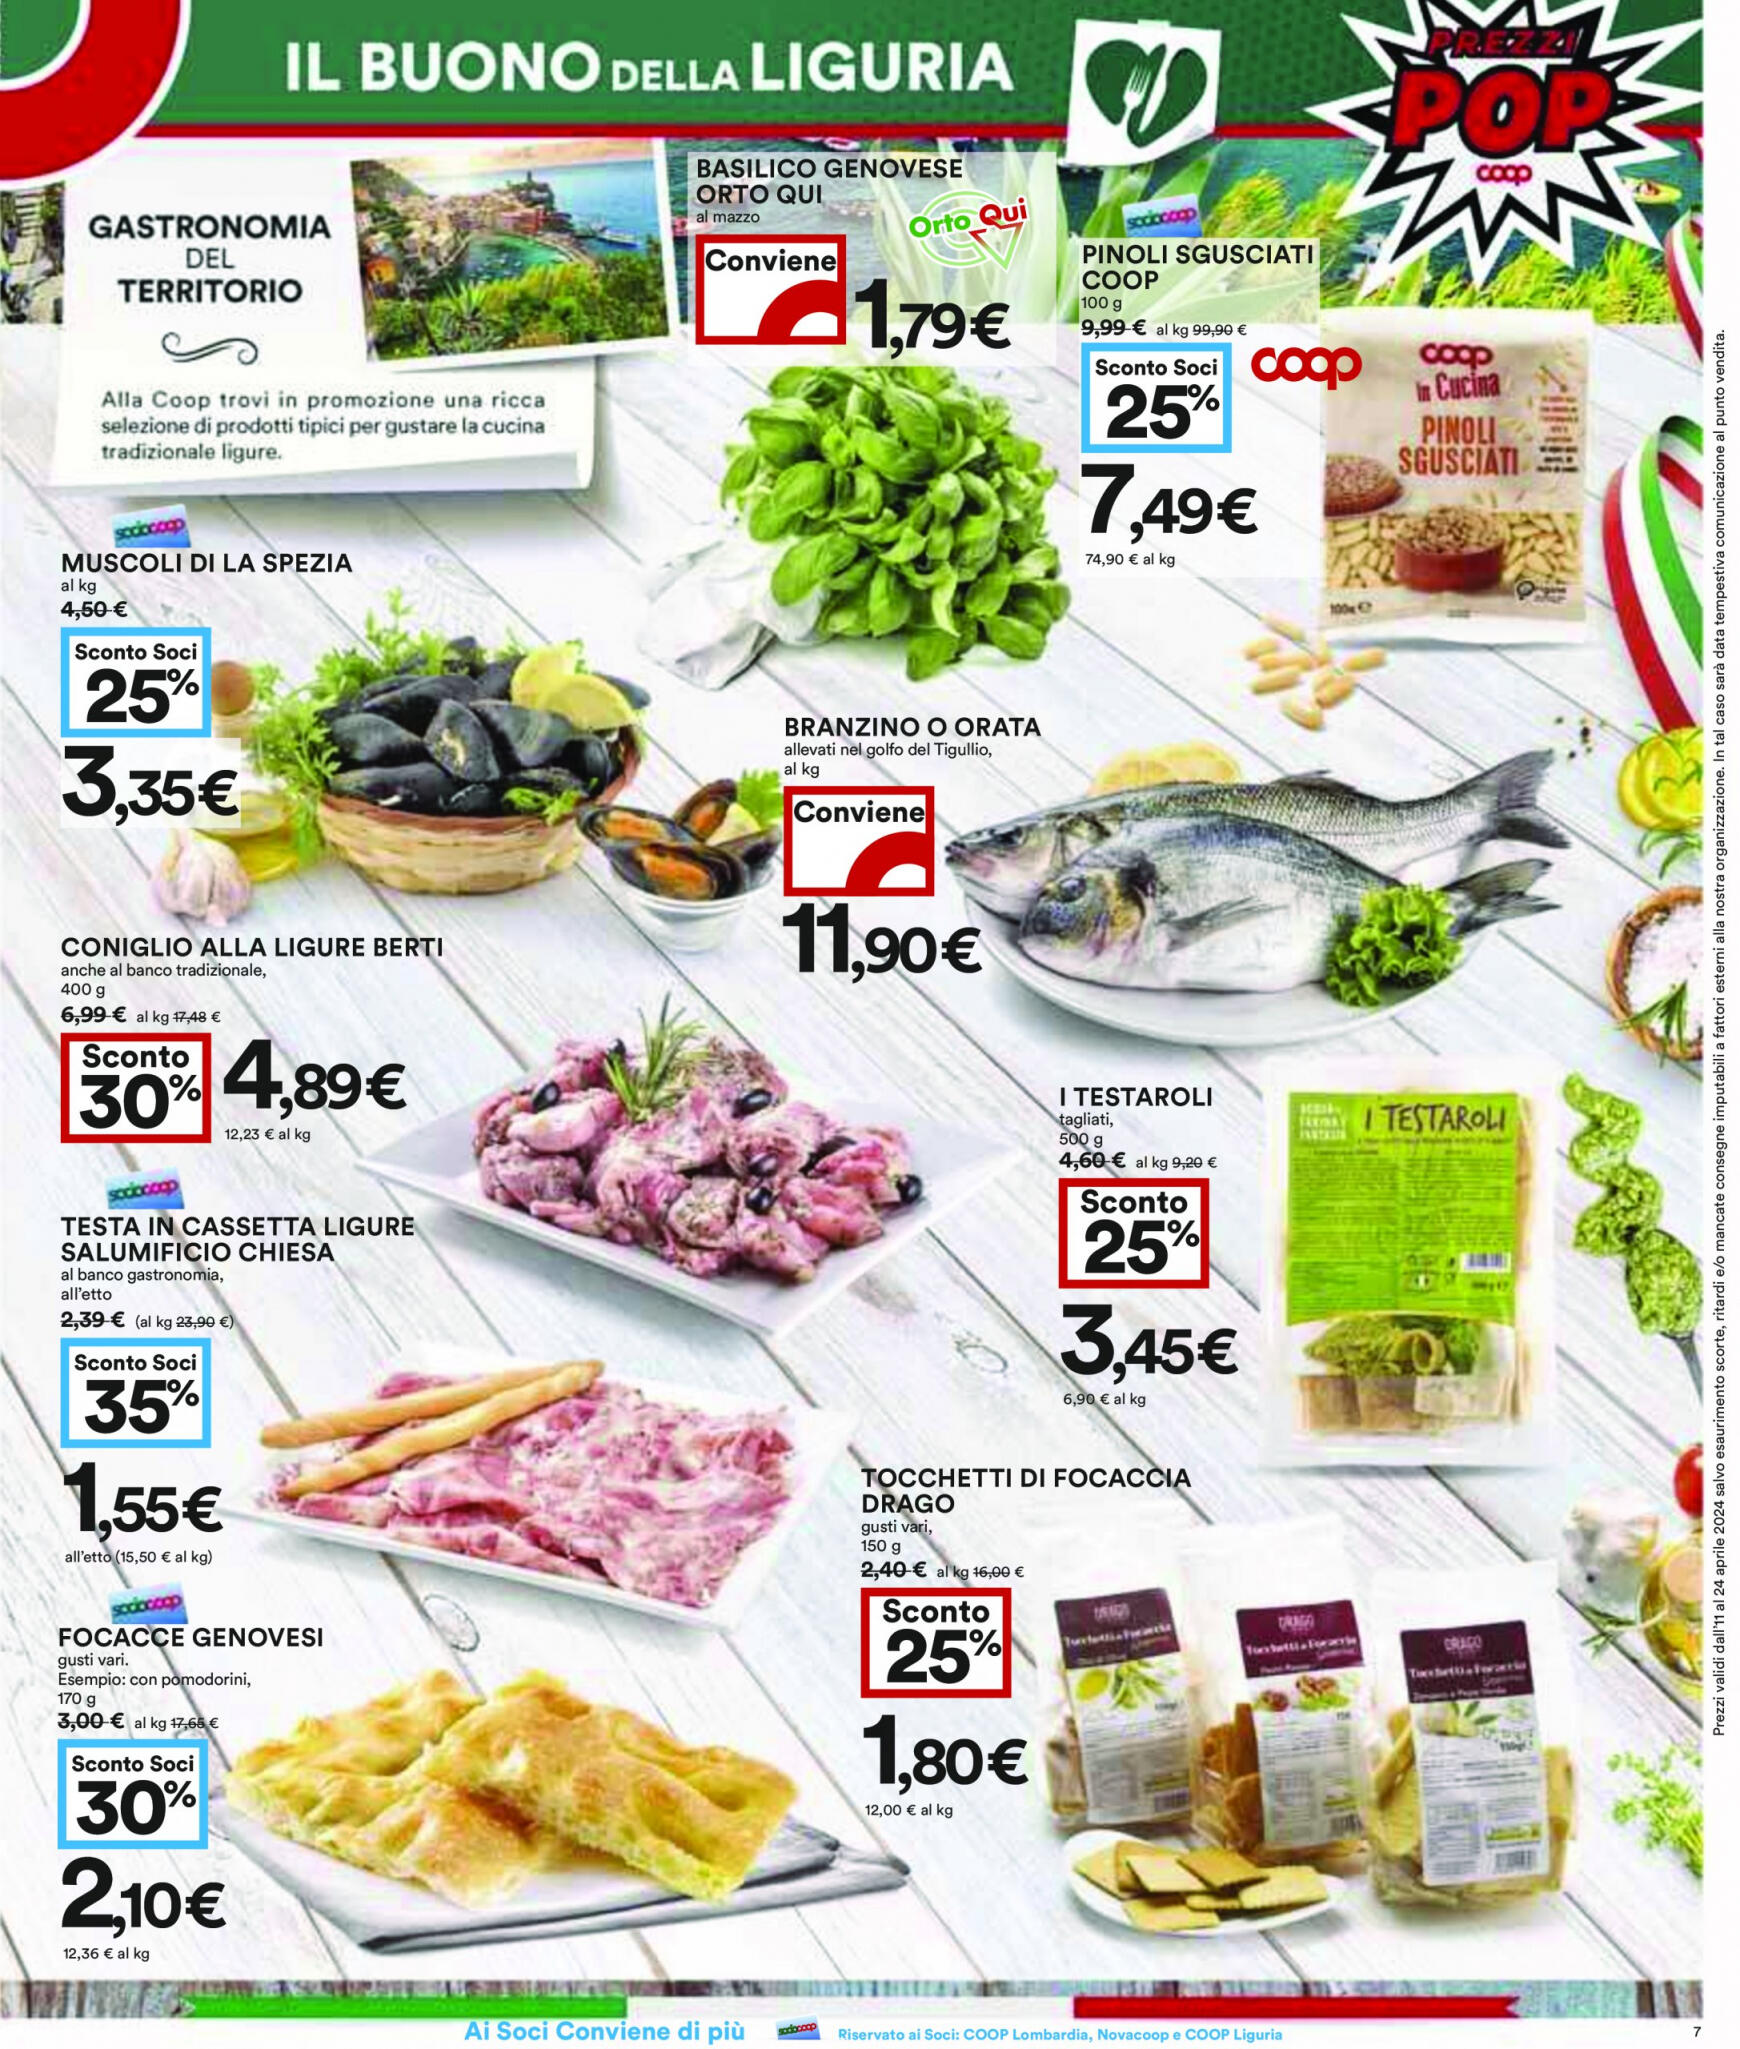 coop - Nuovo volantino Coop 11.04. - 24.04. - page: 7